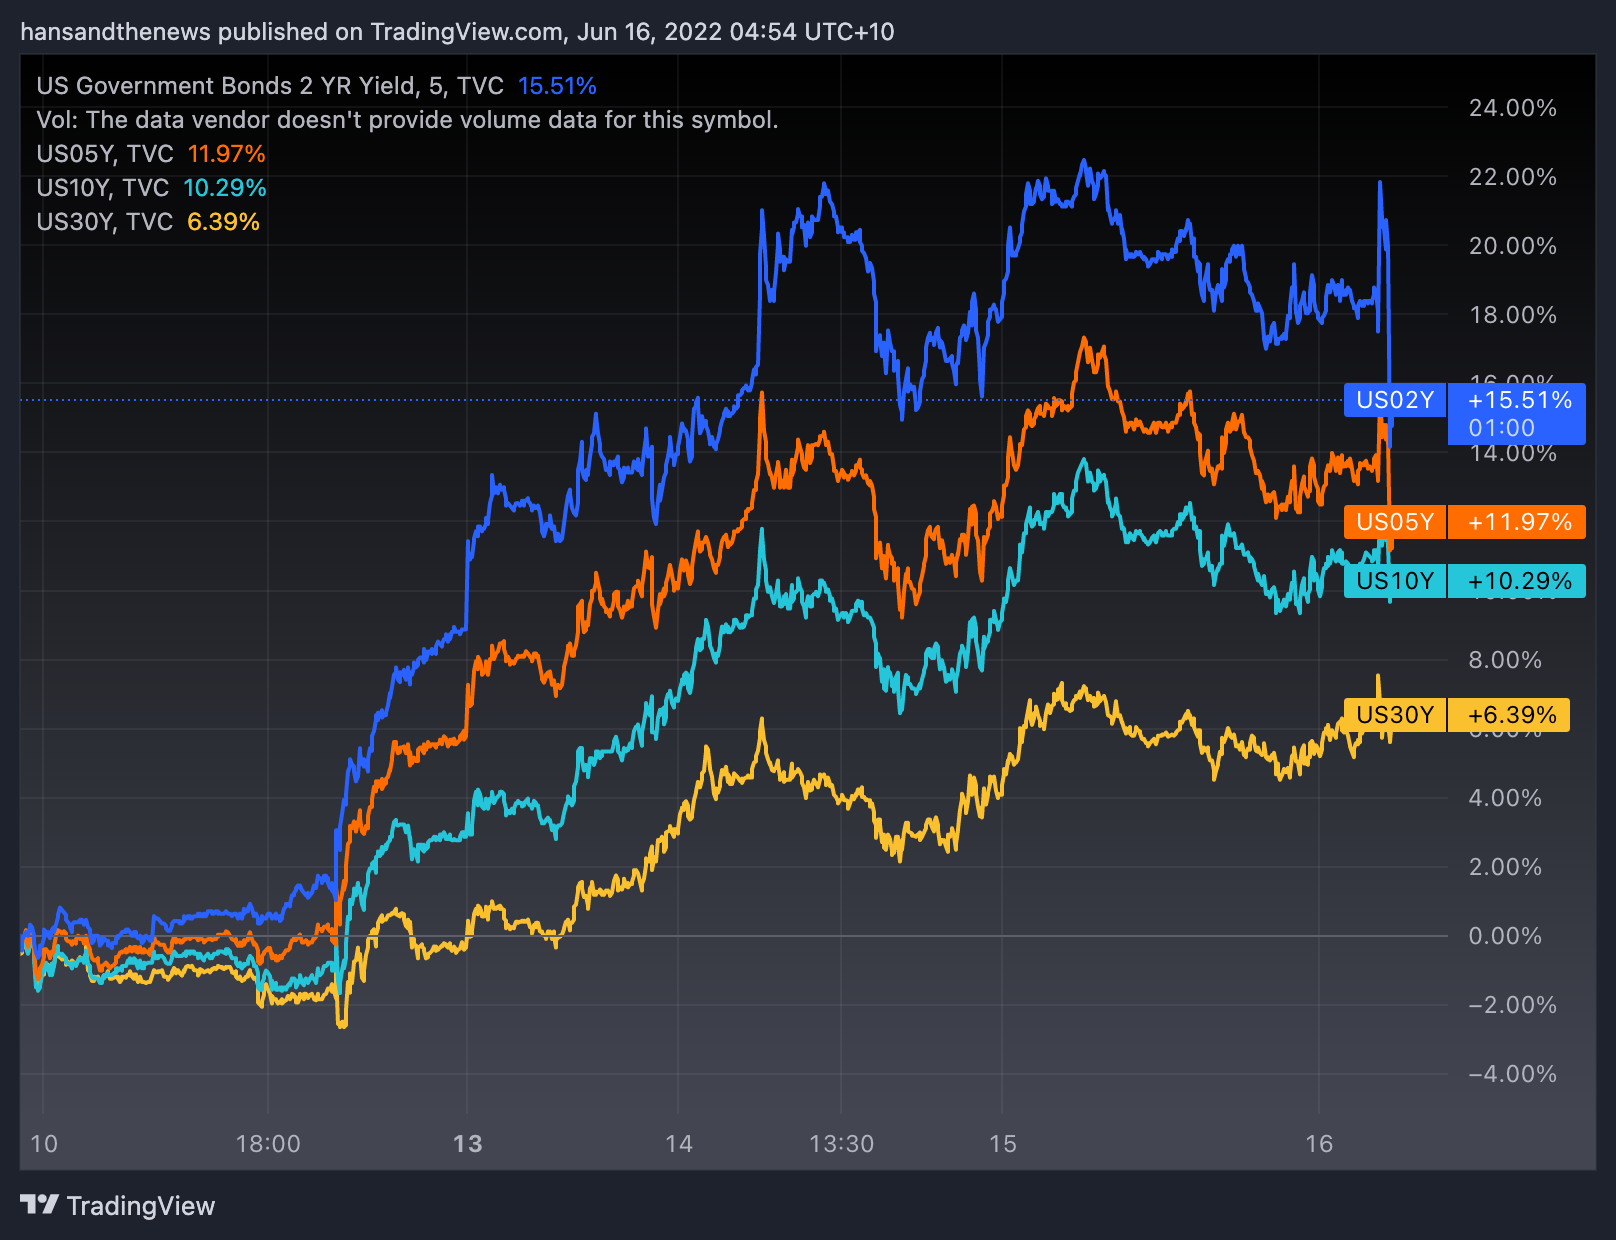 The one-week change in US yields. (Source: Trading View)